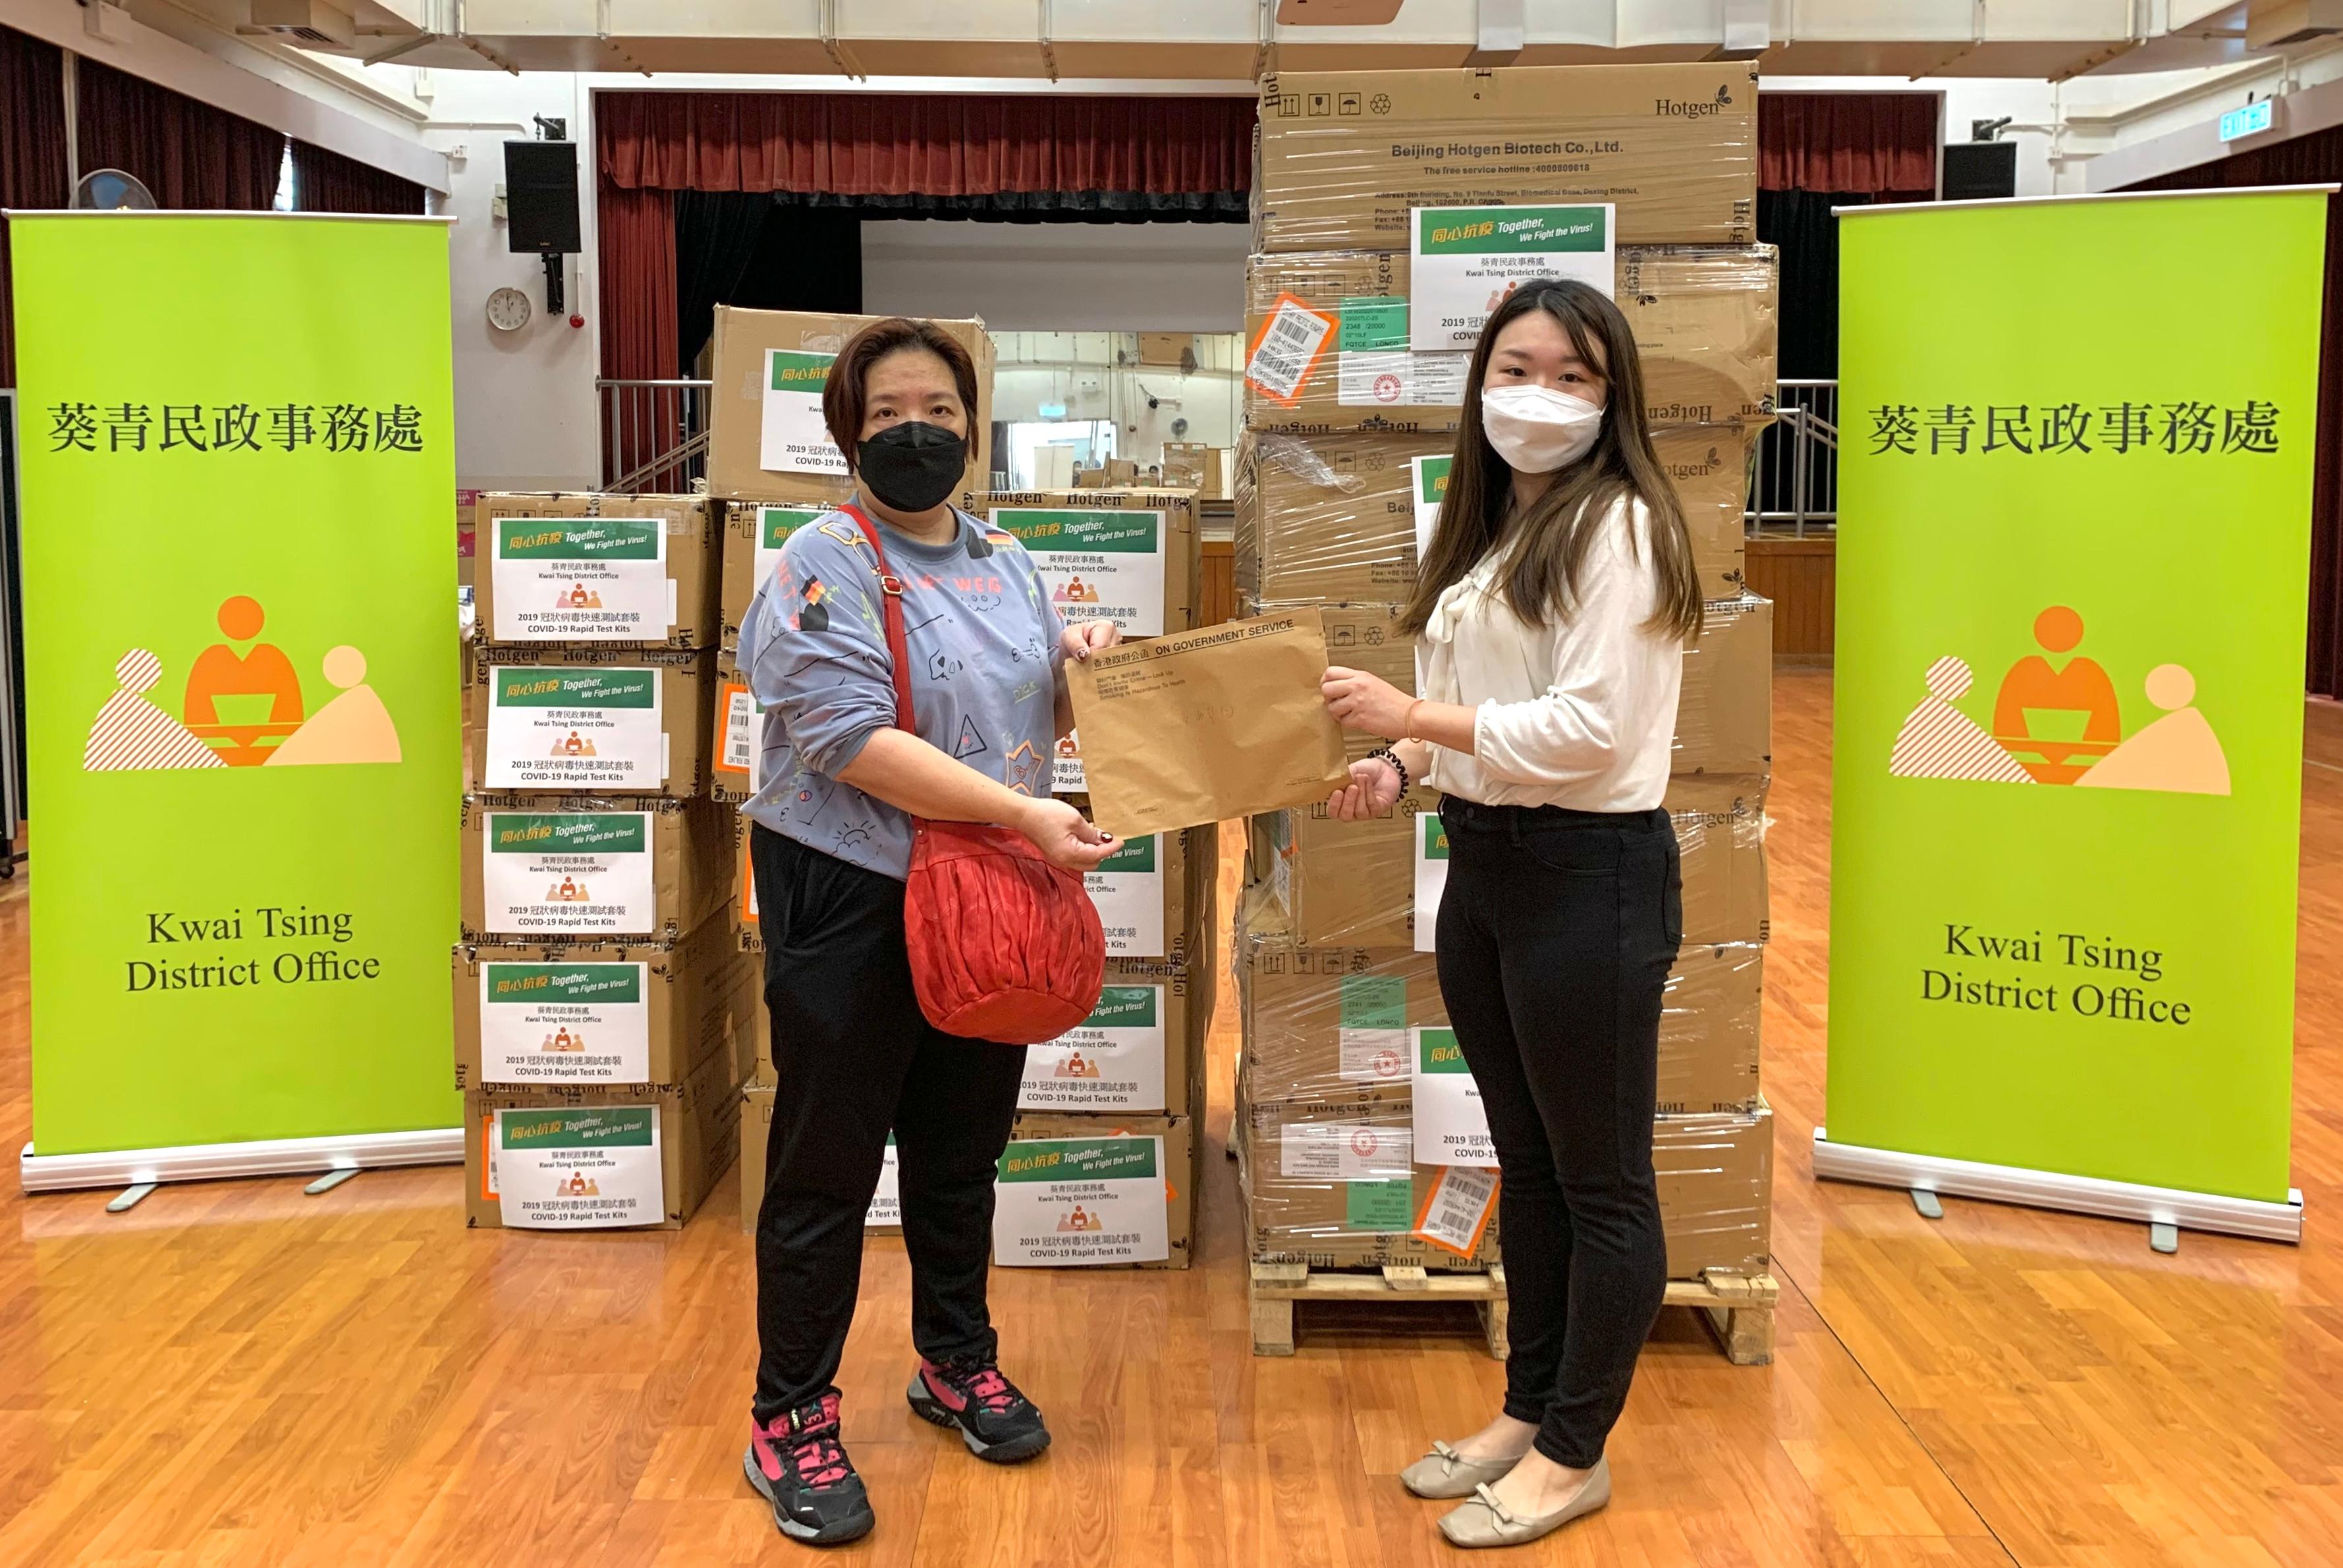 The Kwai Tsing District Office today (March 14) distributed COVID-19 rapid test kits to households, cleansing workers and property management staff living and working in Kwai Chung Estate for voluntary testing through the Housing Department.
